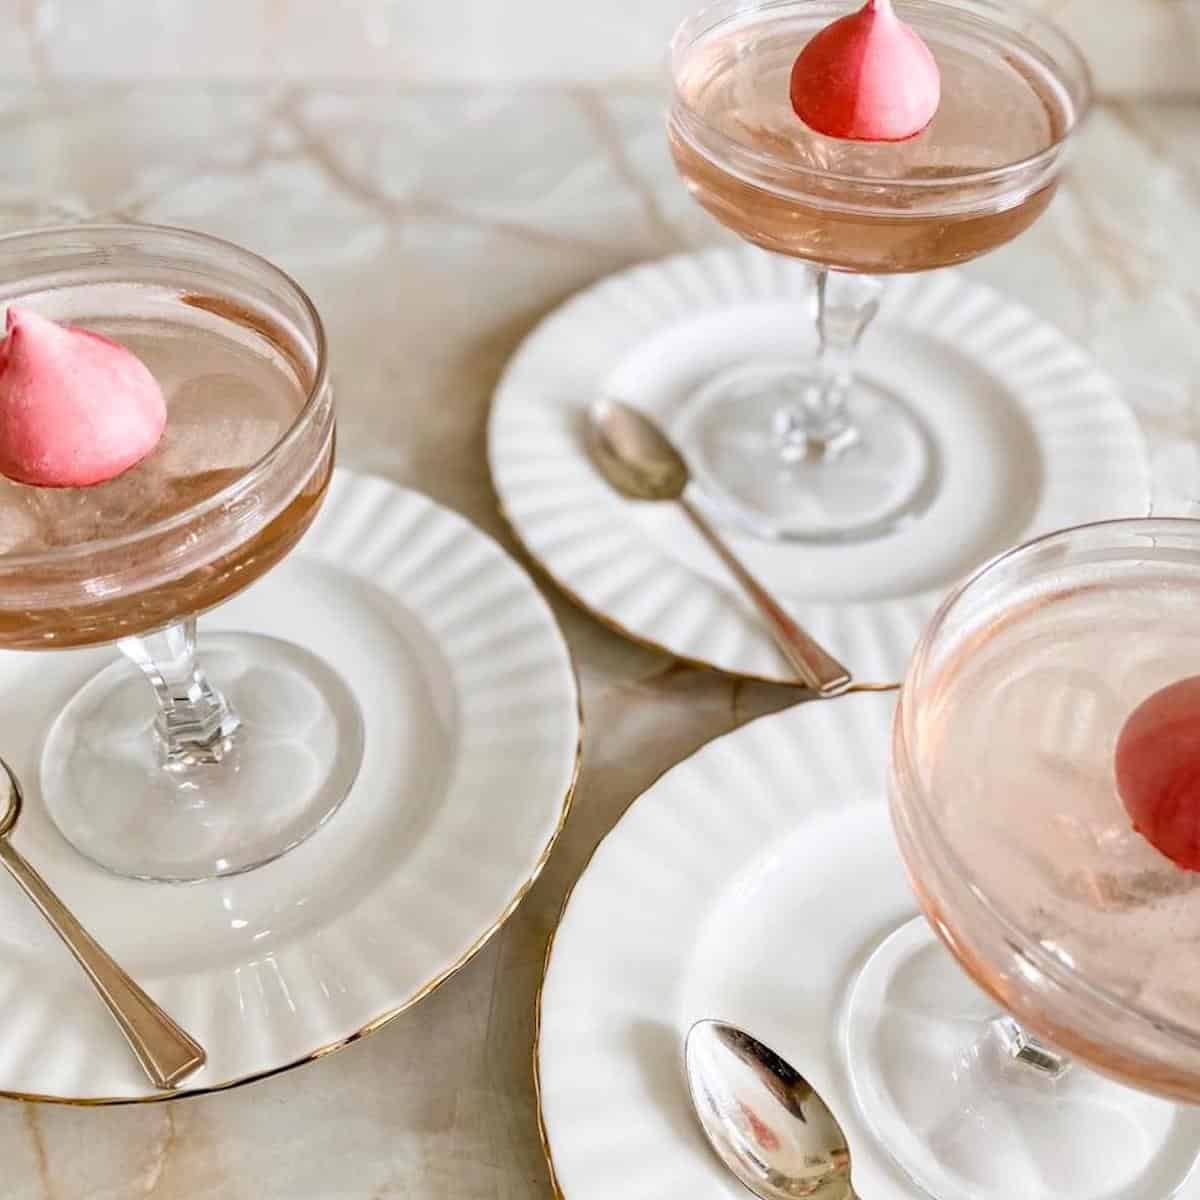 Pink prosecco jelly served in champagne coupe glasses.